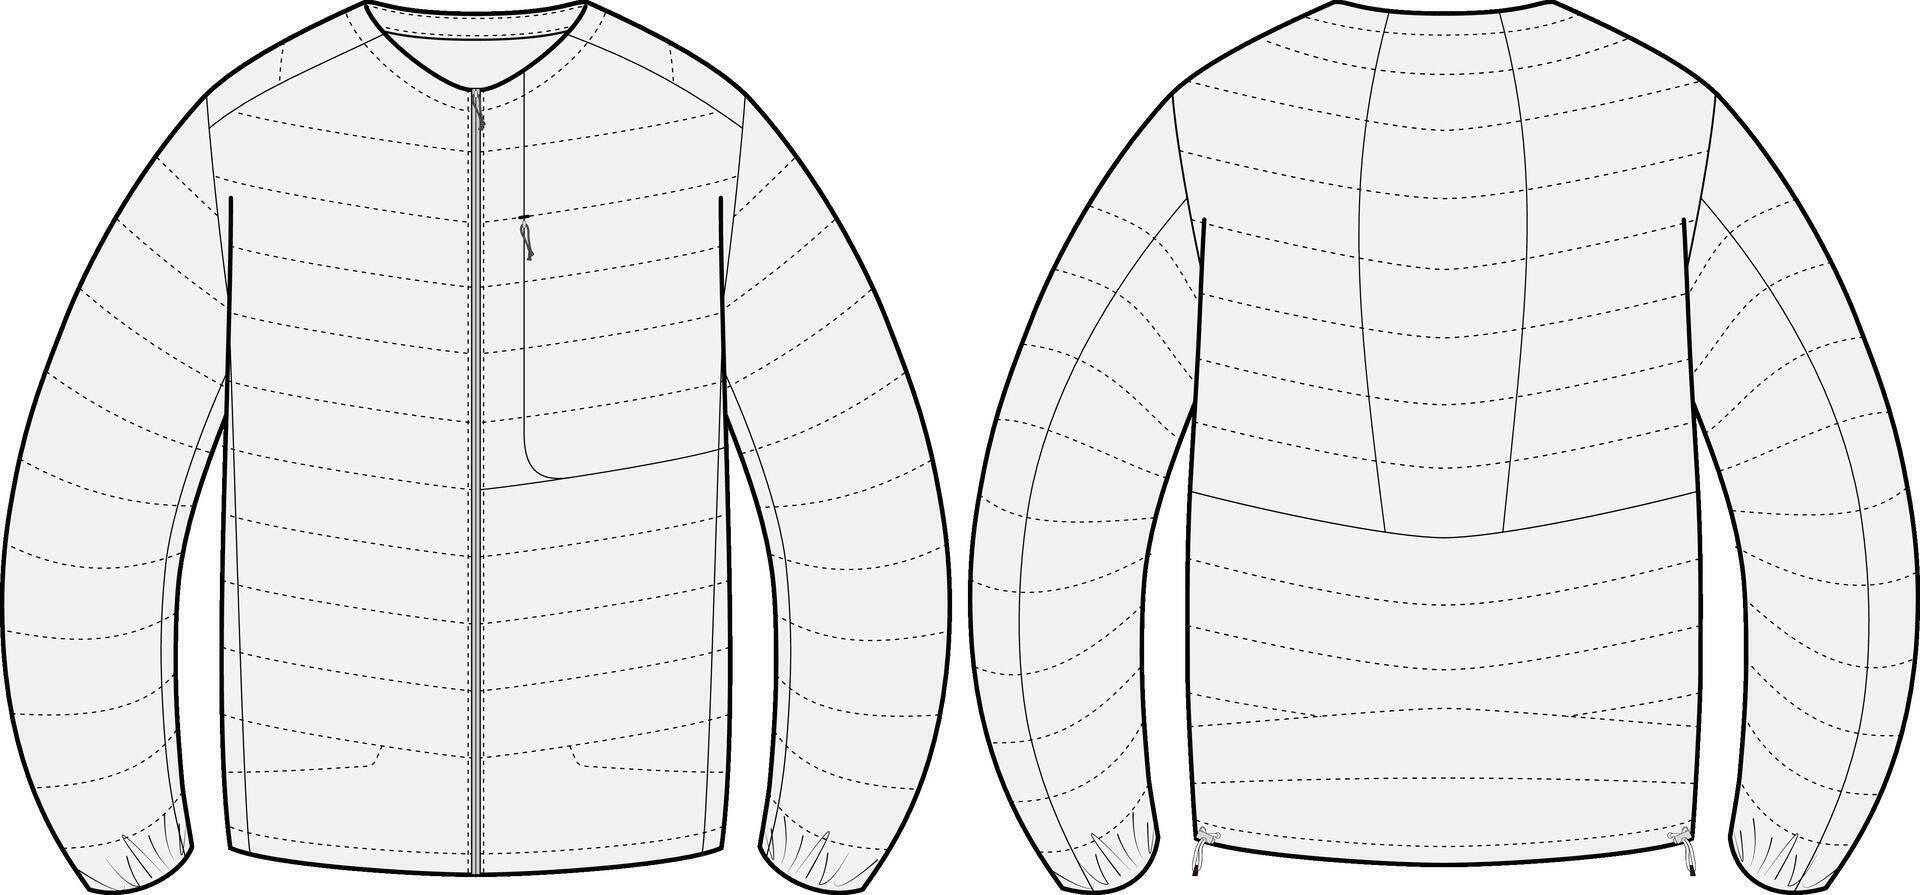 Long sleeve Nylon Puffer Jacket Design Vector Template with front and back view, unisex winter jacket